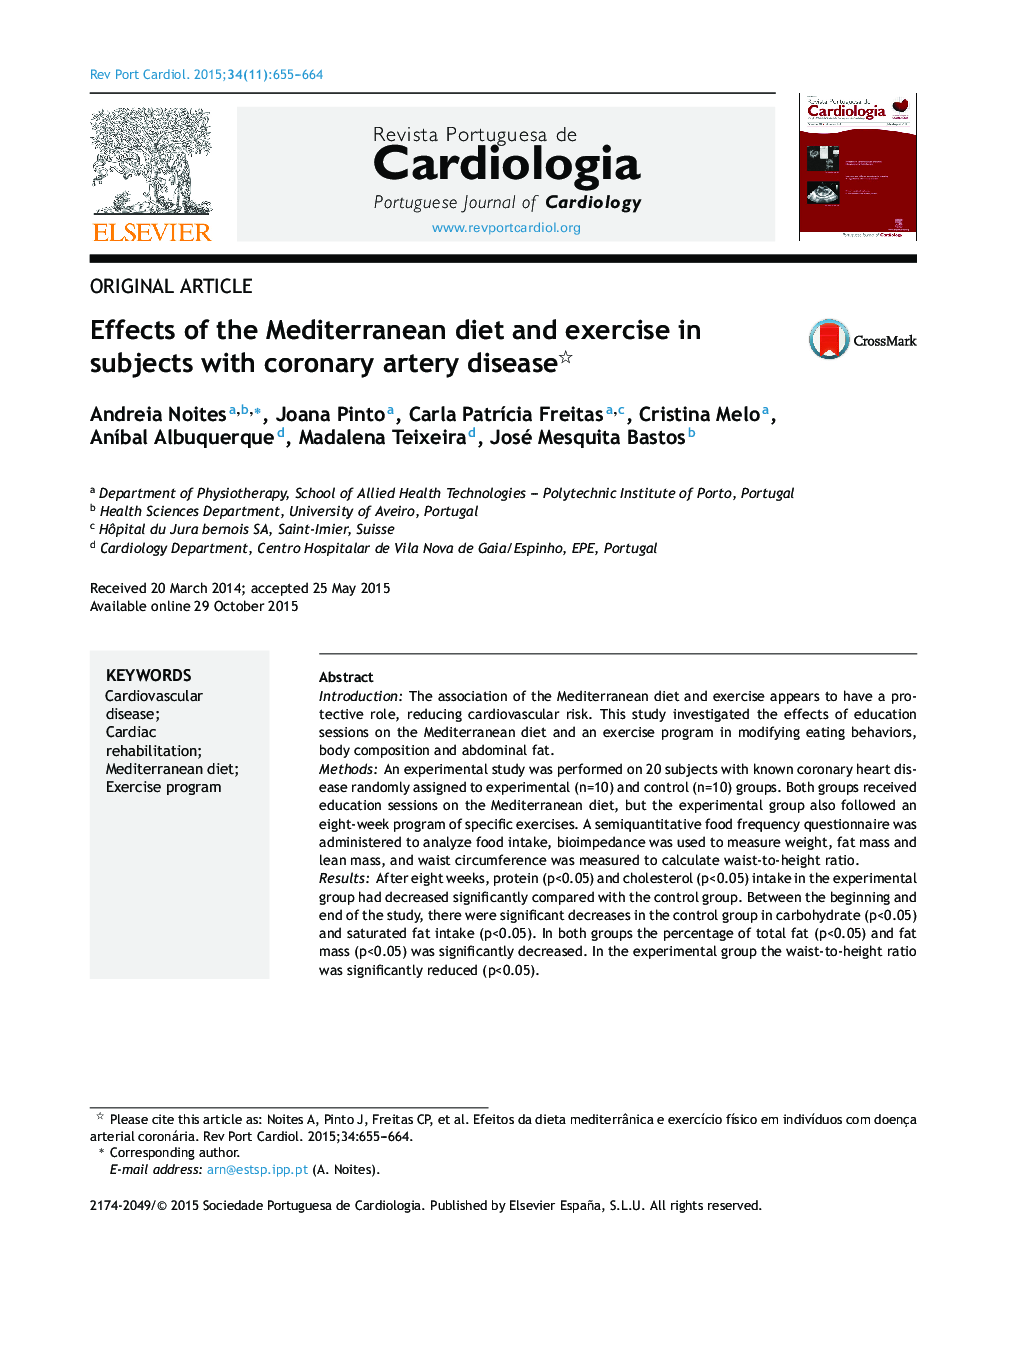 Effects of the Mediterranean diet and exercise in subjects with coronary artery disease